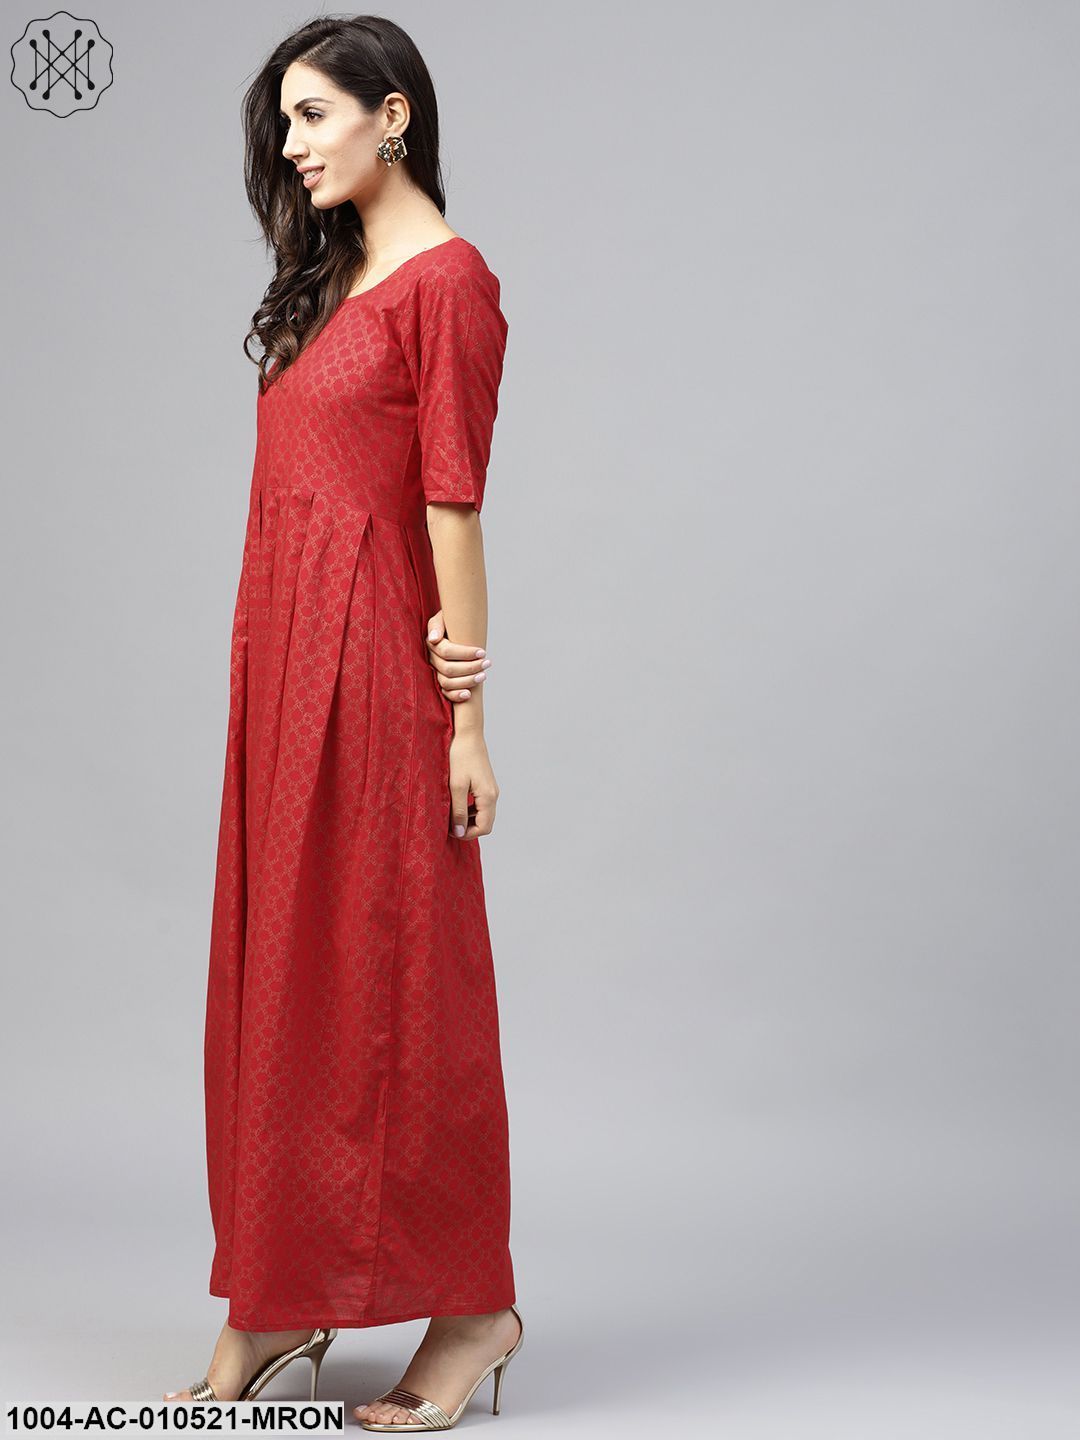 Maroon Printed Maxi Dress With Round Neck And Half Sleeves